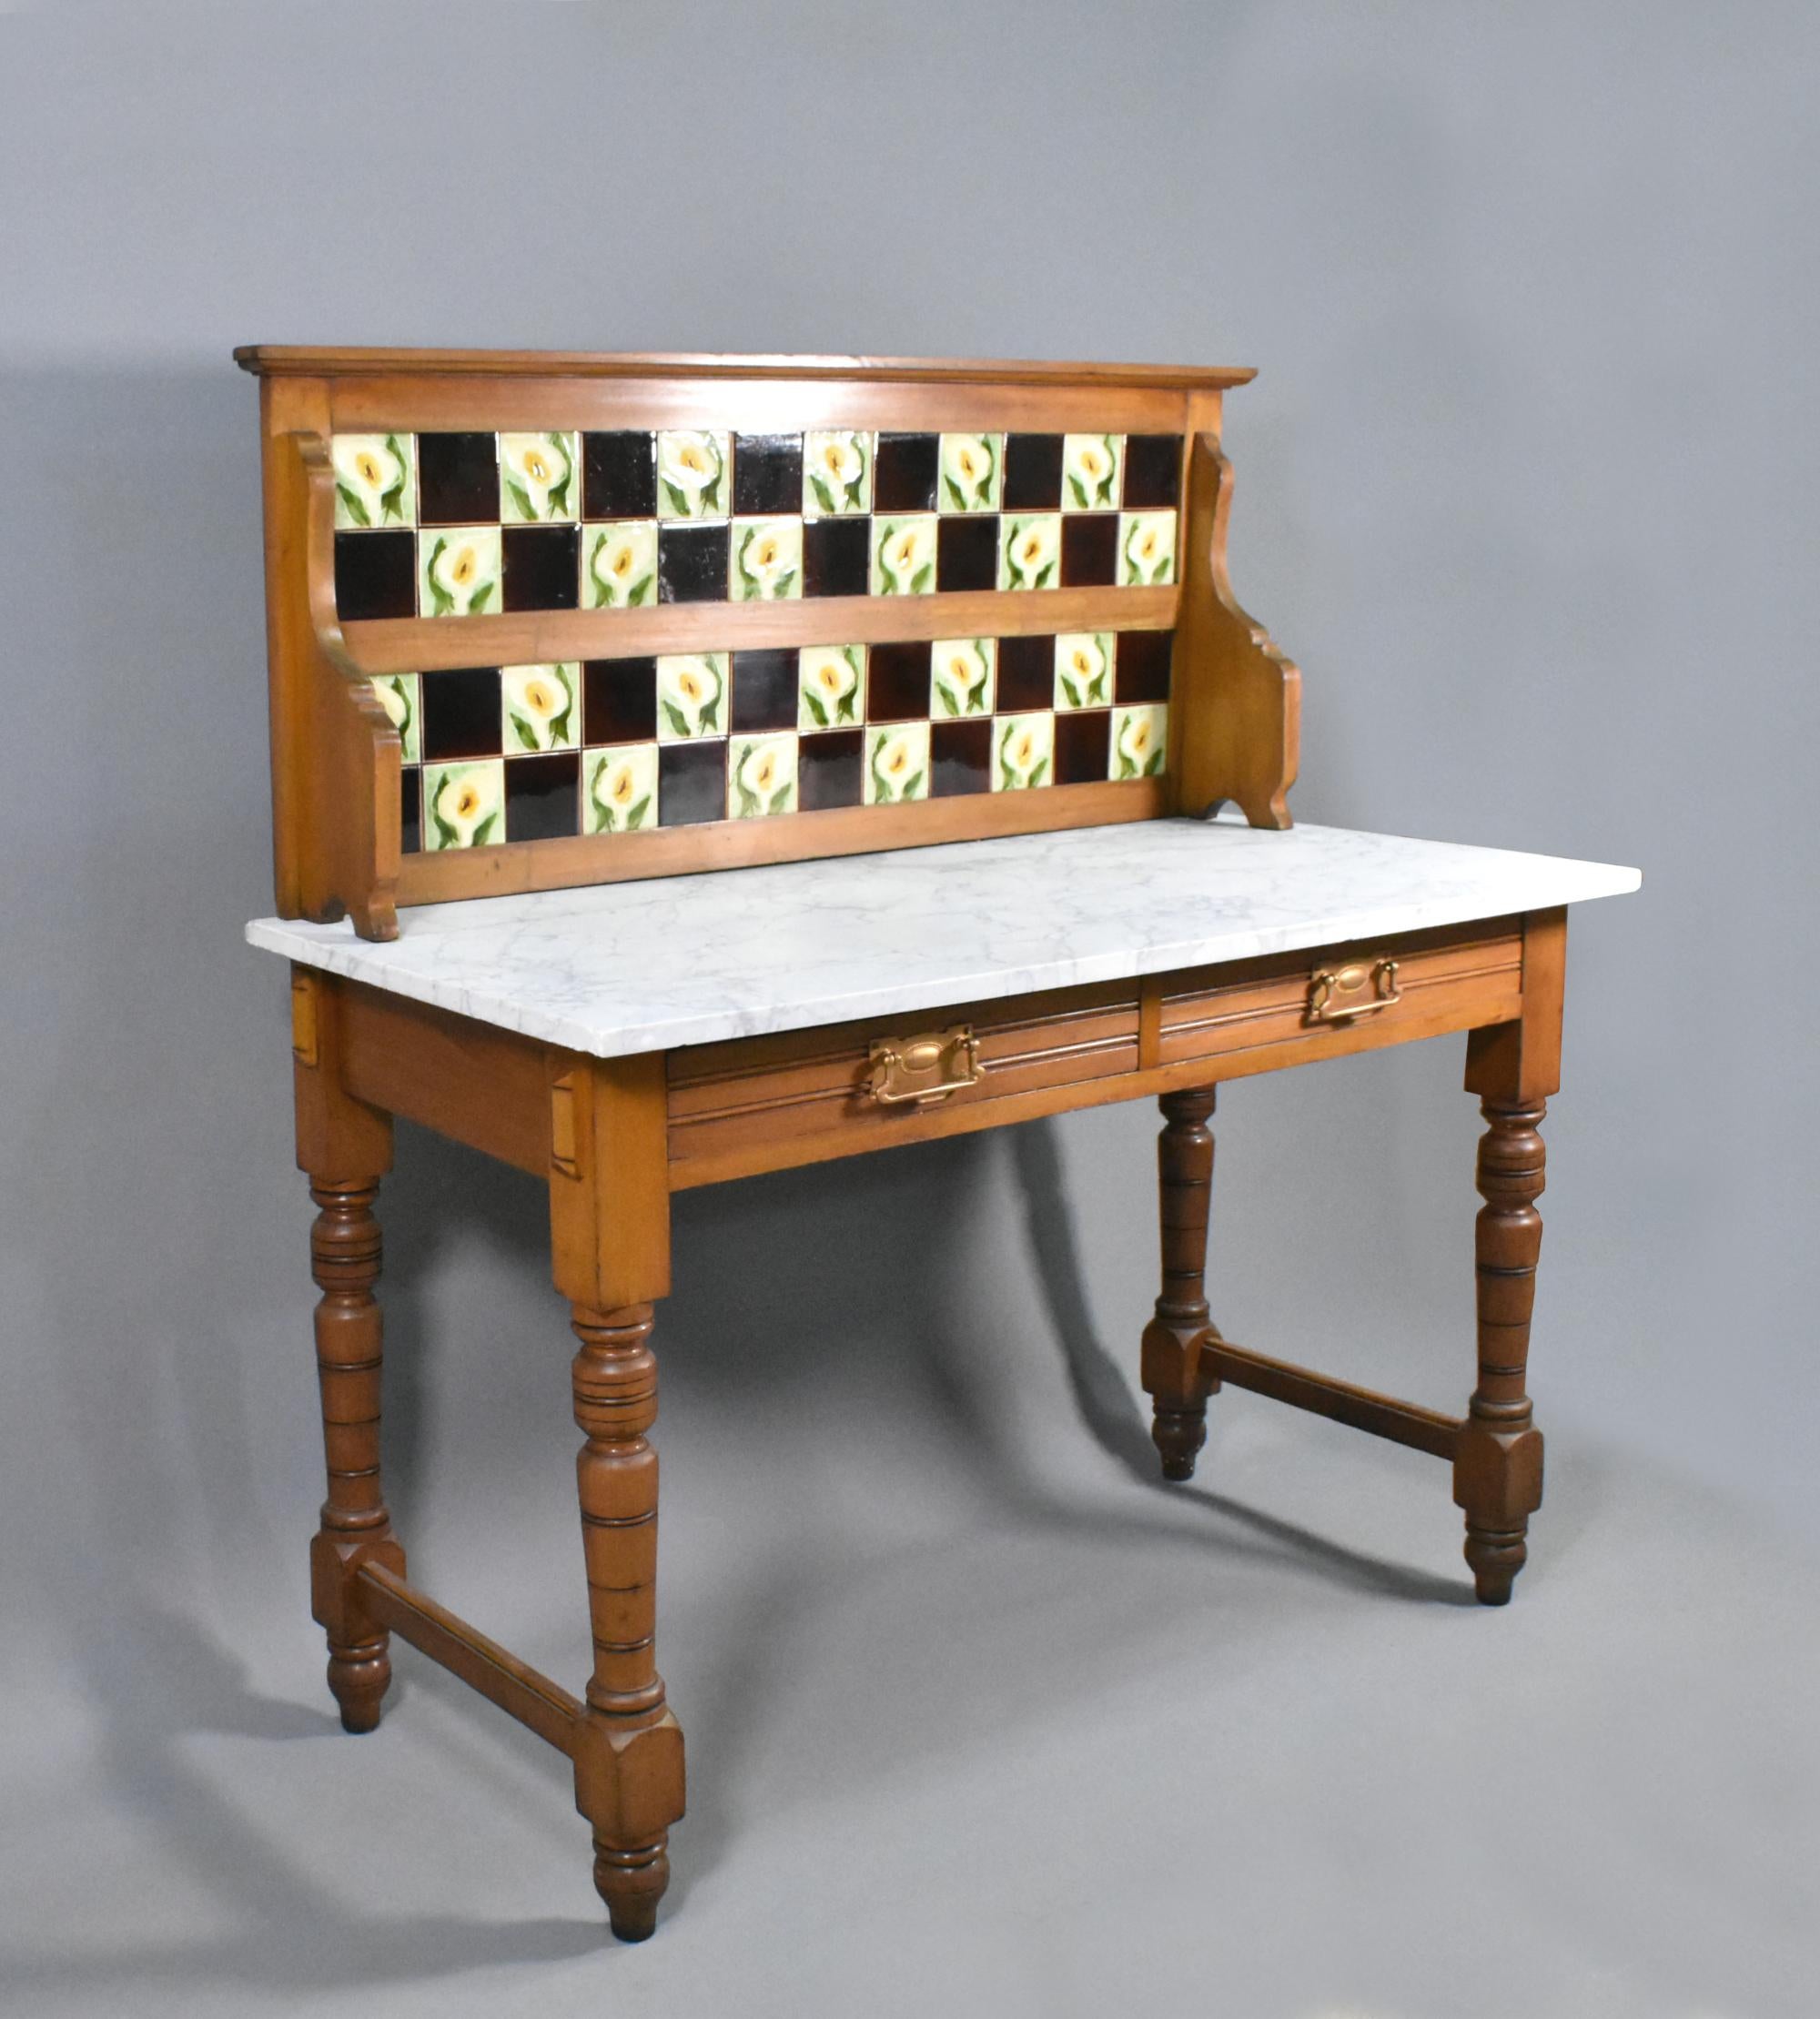 Edwardian Tile Back Marble Top Washstand in Birch
 
This attractive washstand features a chequered tiled splash back, decorated with arum lilies and contrasting deep brown squares, all captivated within a wooden frame.
 
The back splash sits on a